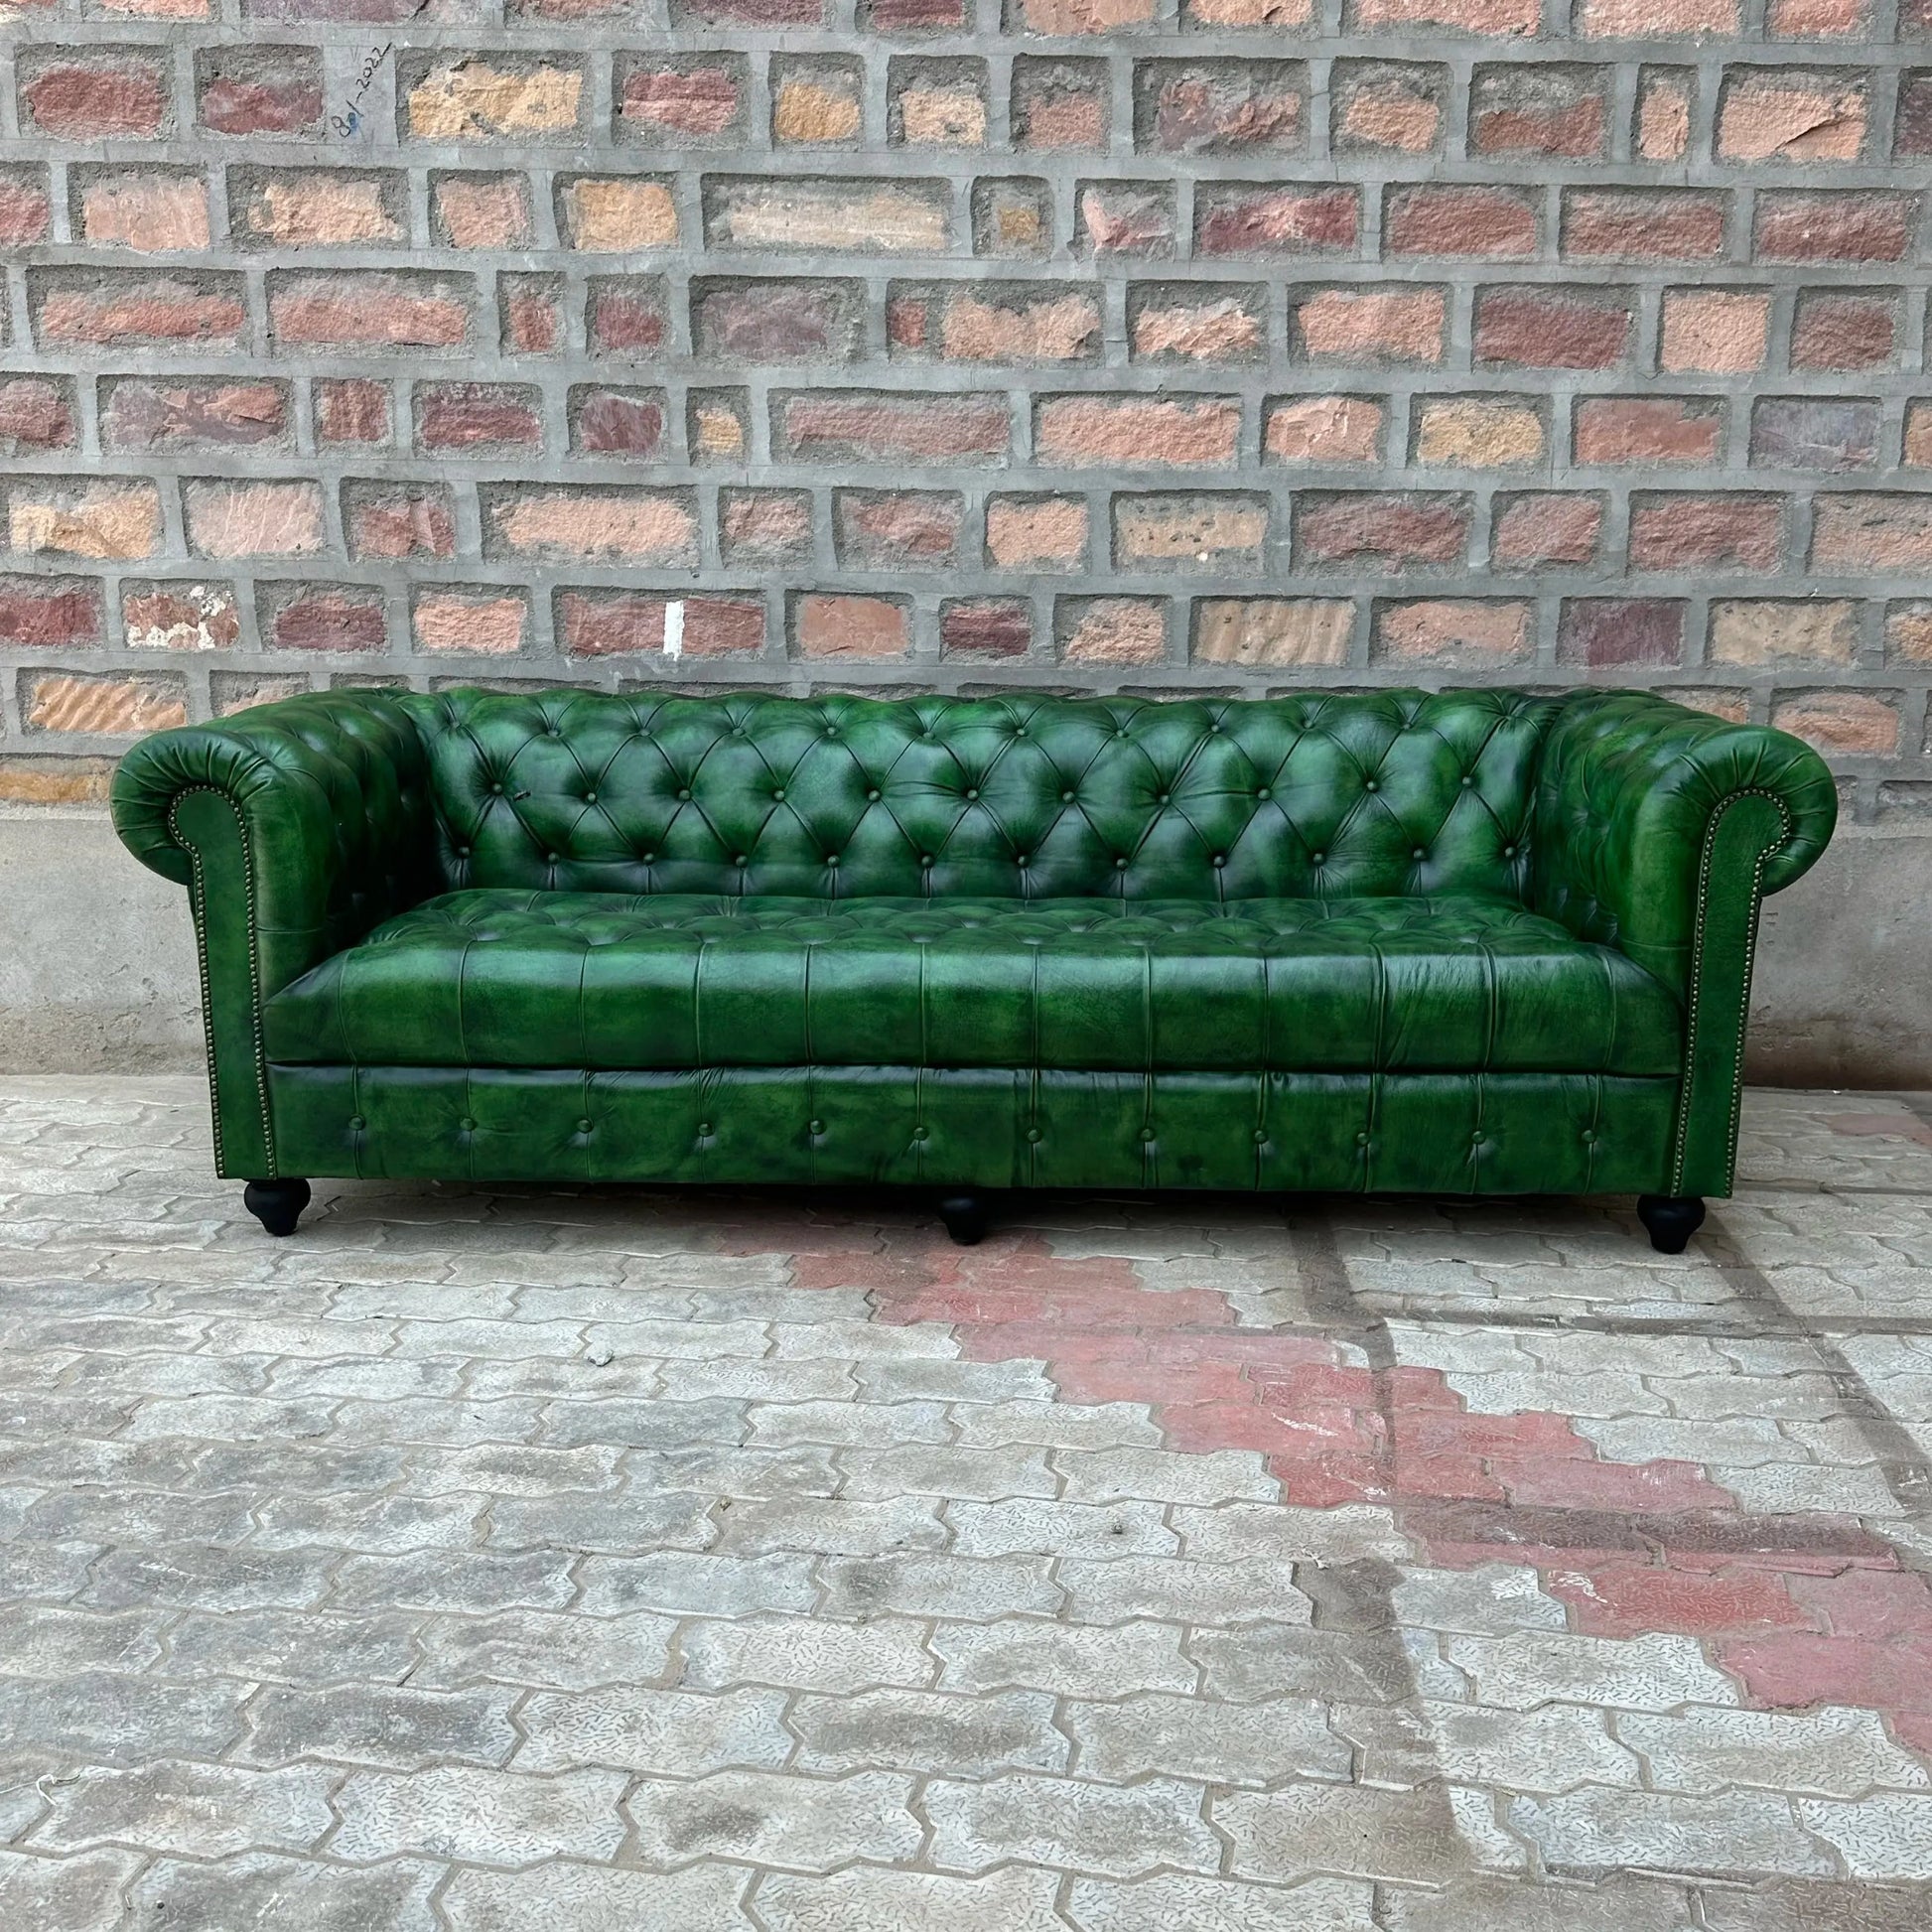 87" Sofa Tufted Bench | Polo Green Chesterfield Leather Sofa with Tufted Bench Seat (PG-3T) by Rising Tide Design Co.